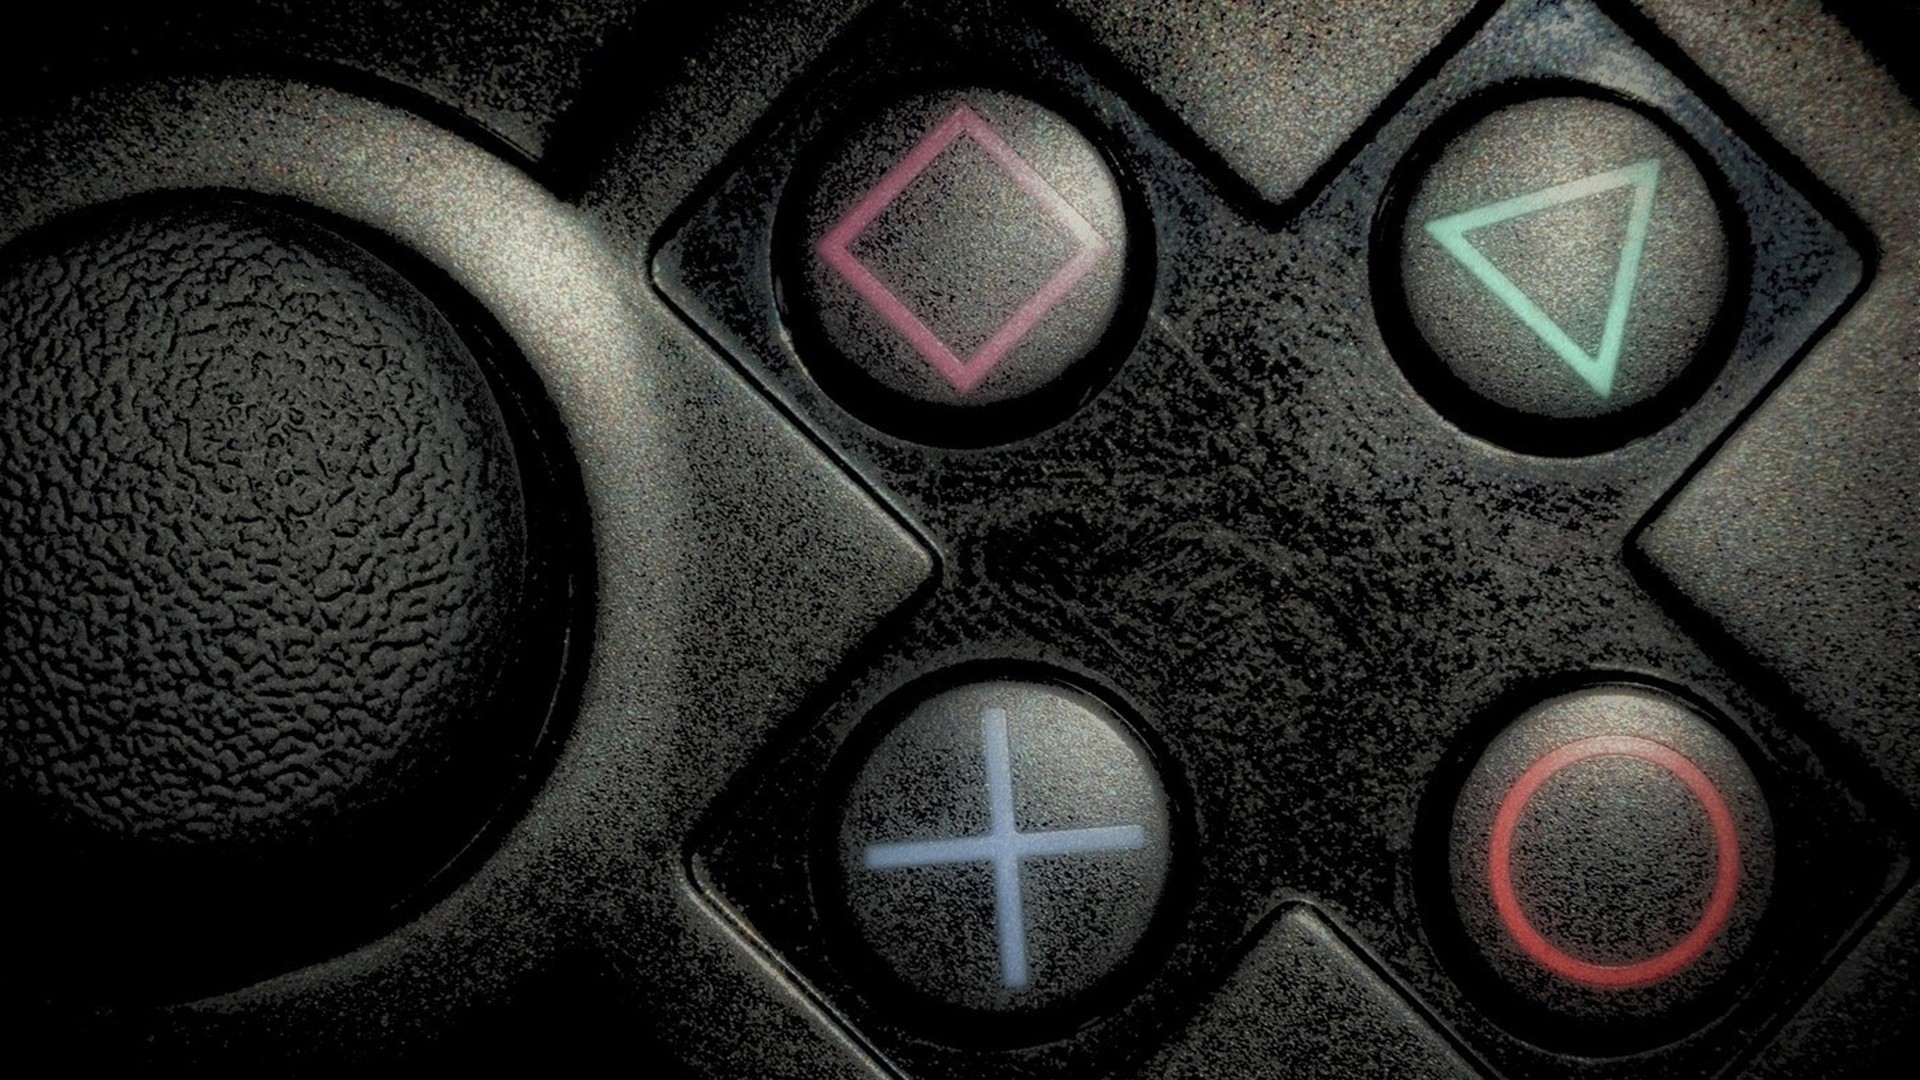 General 1920x1080 video games PlayStation controllers macro black nostalgia texture closeup Sony